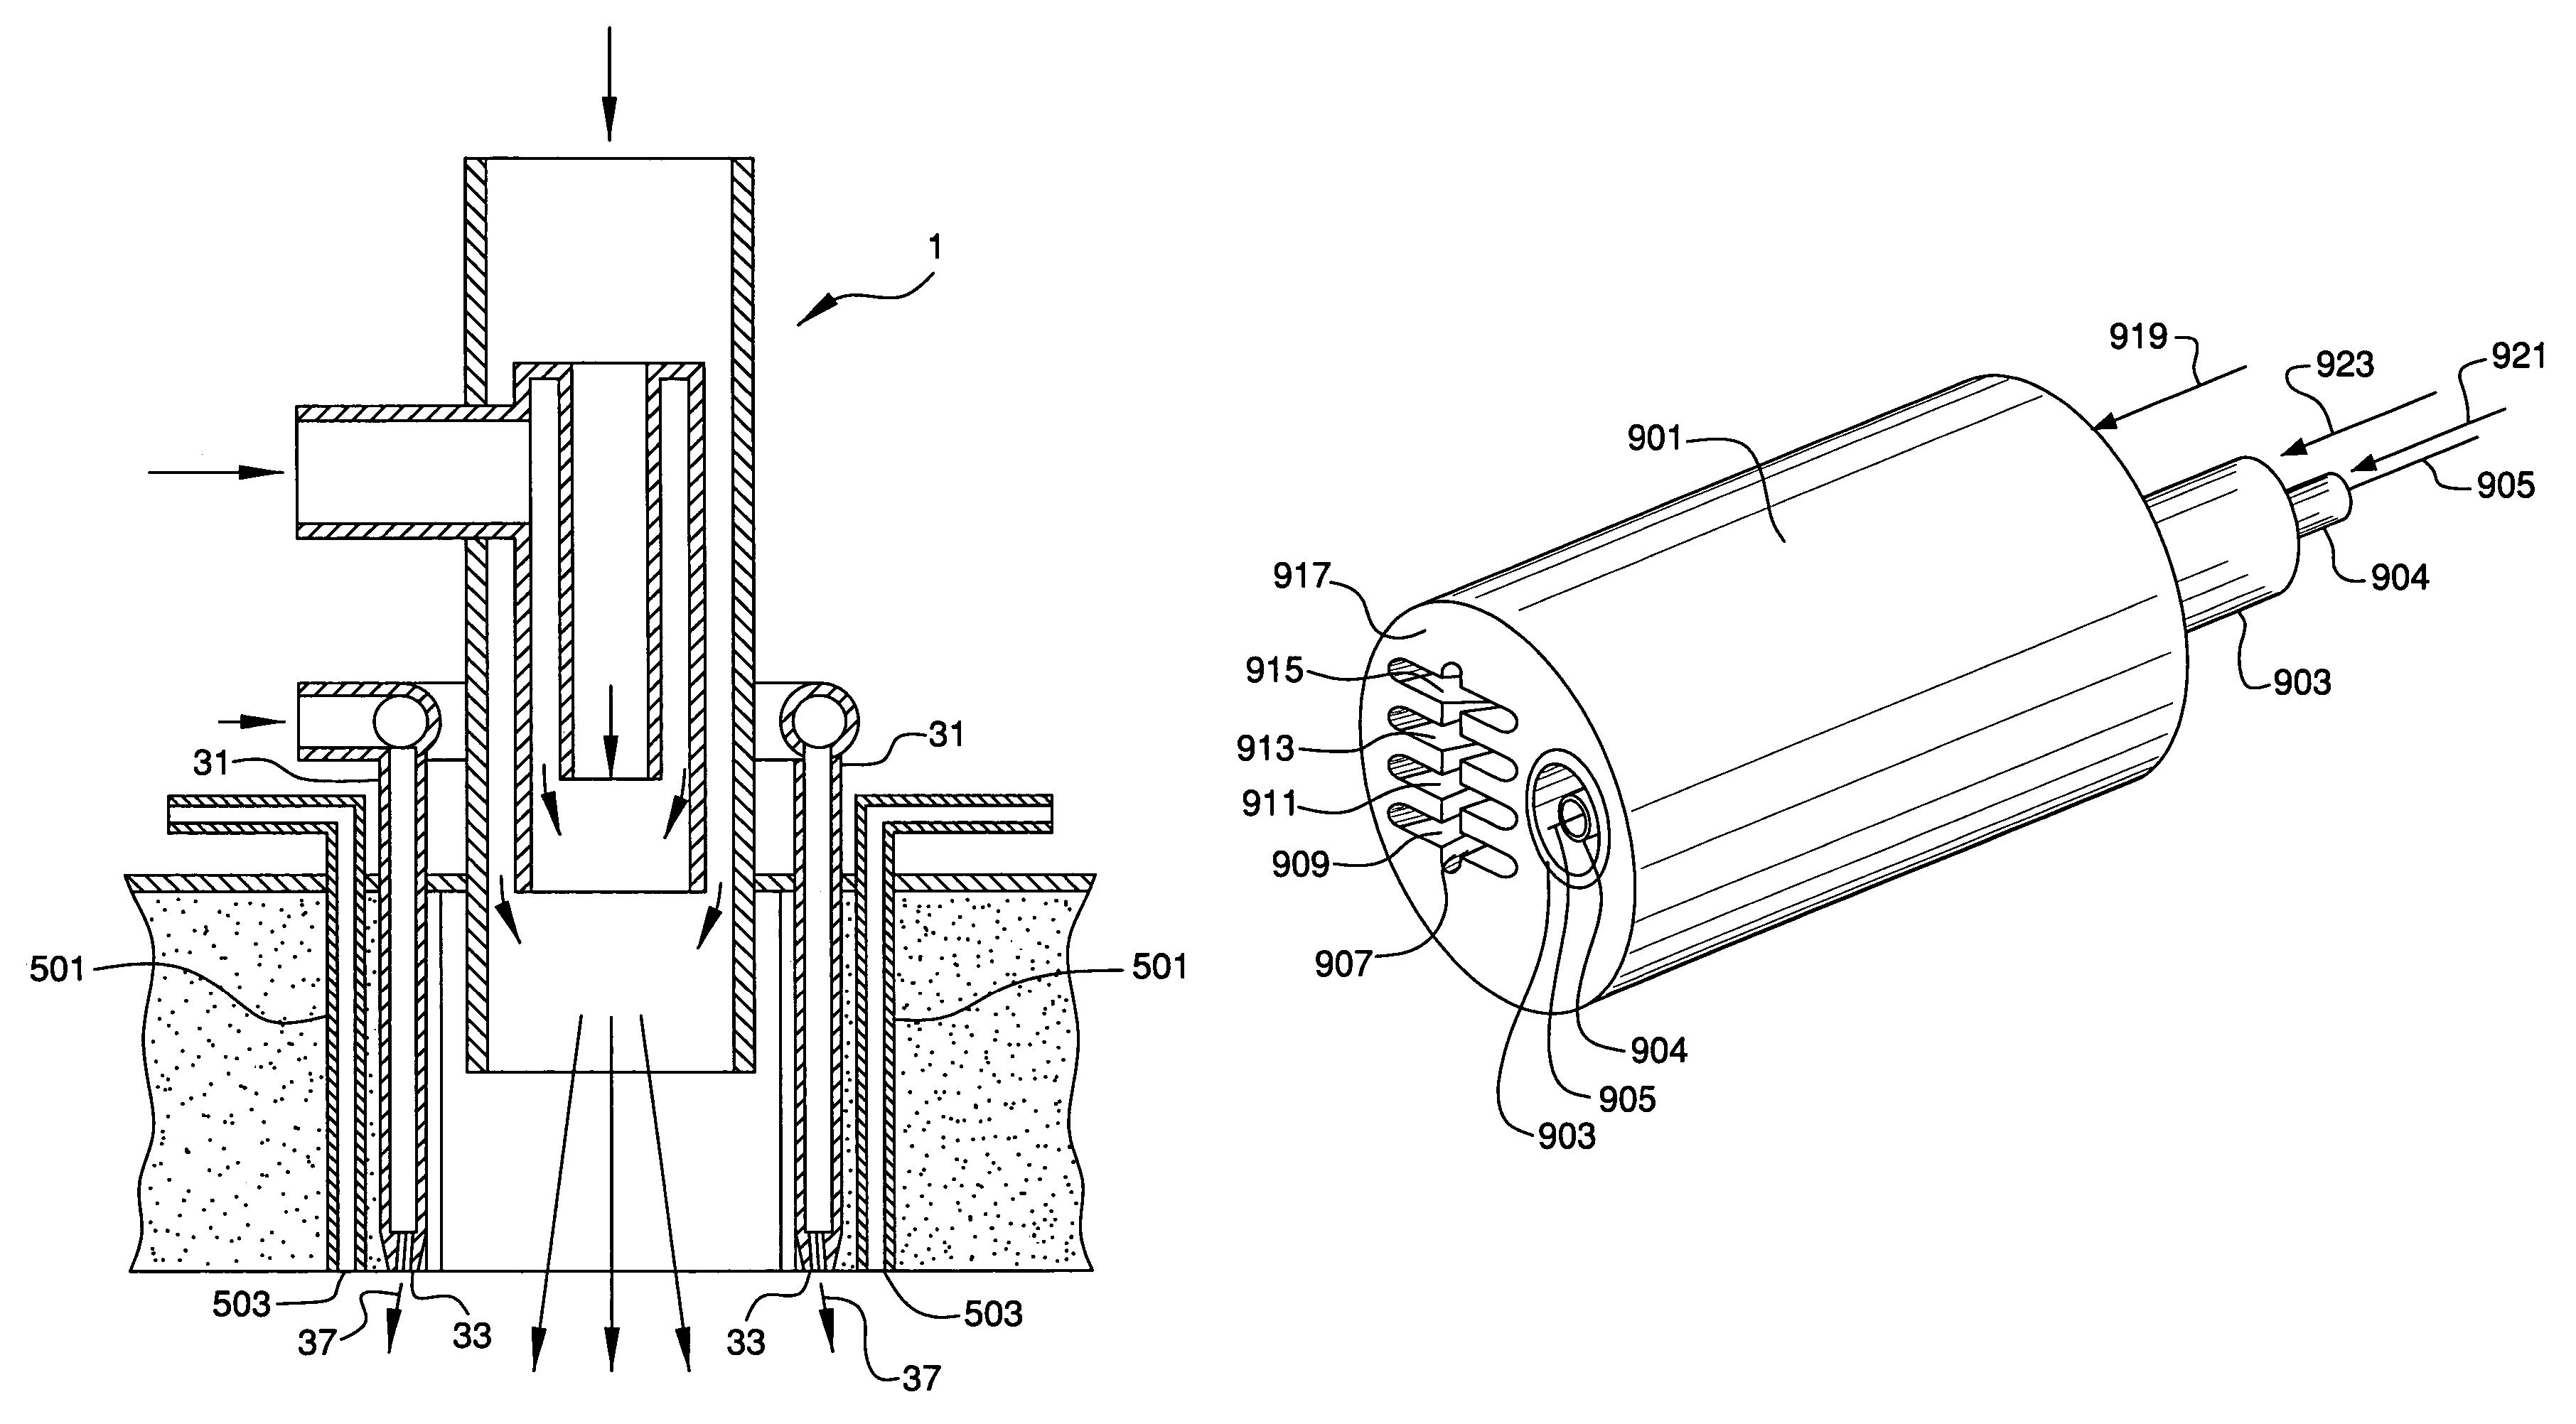 Staged combustion system with ignition-assisted fuel lances